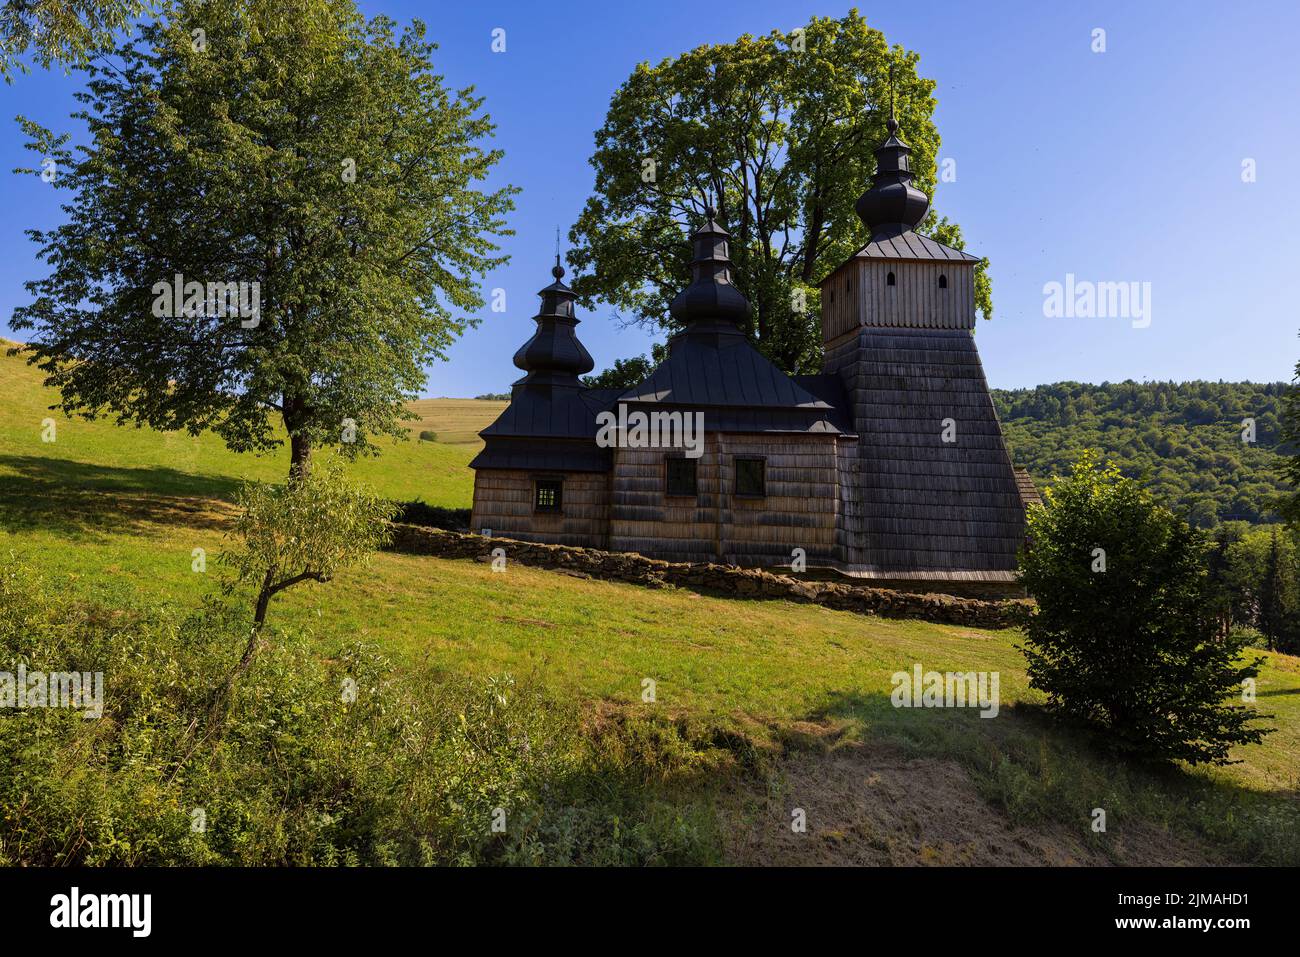 Old orthodox church under the tree on the hill at clear day. No people, no clouds. Stock Photo